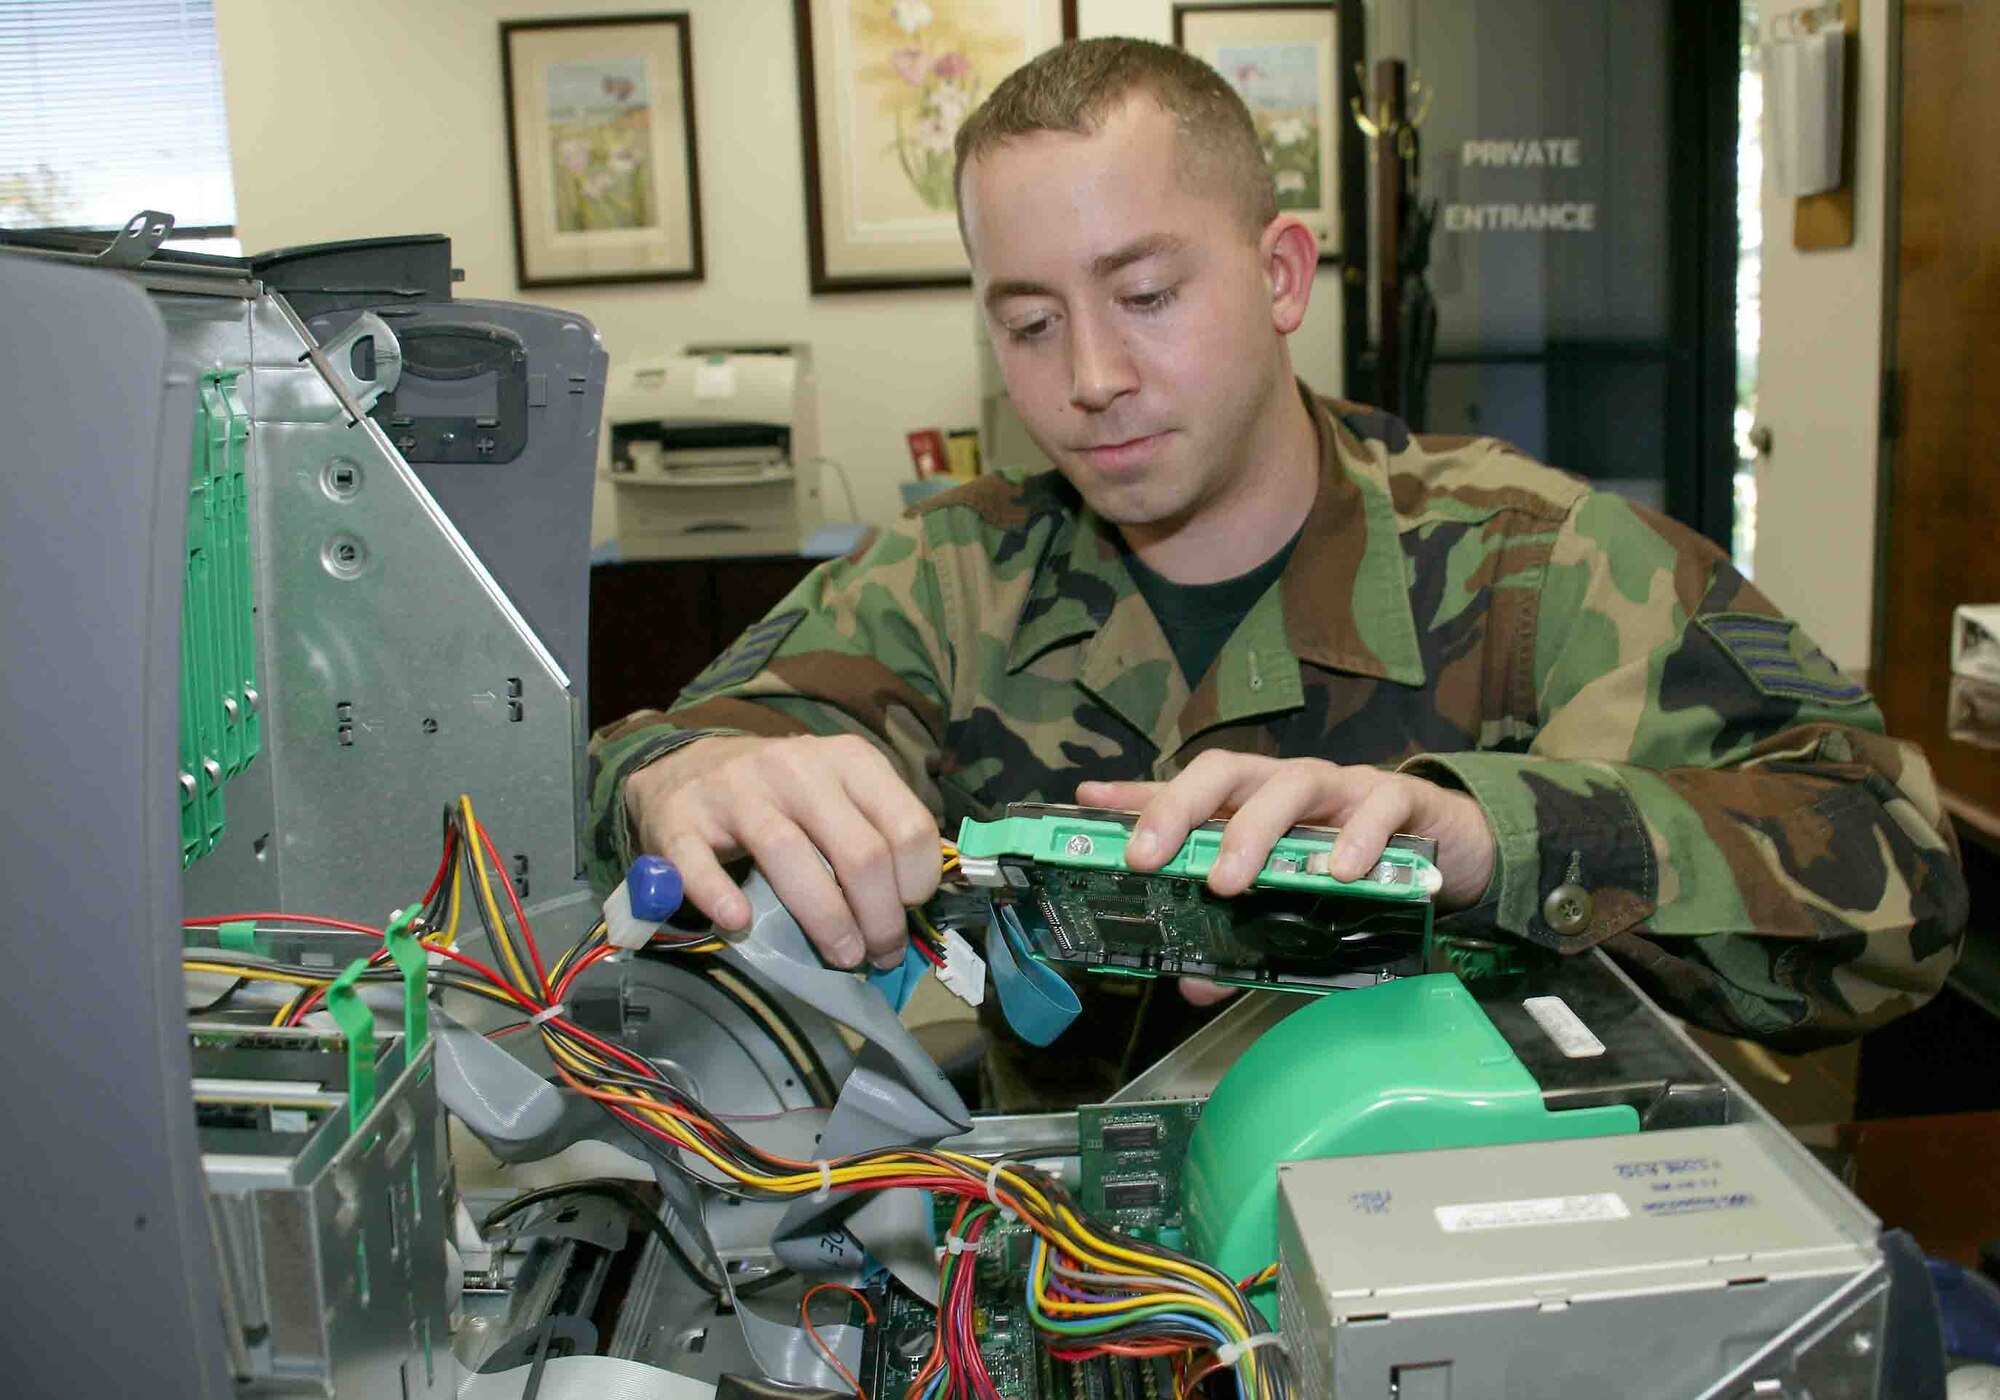 Staff Sgt. Travis Bingham, 20th Fighter Wing functional systems administrator, replaces a crashed hard drive on a government computer. (U.S. Air Force photo/Senior Airman John Gordinier)